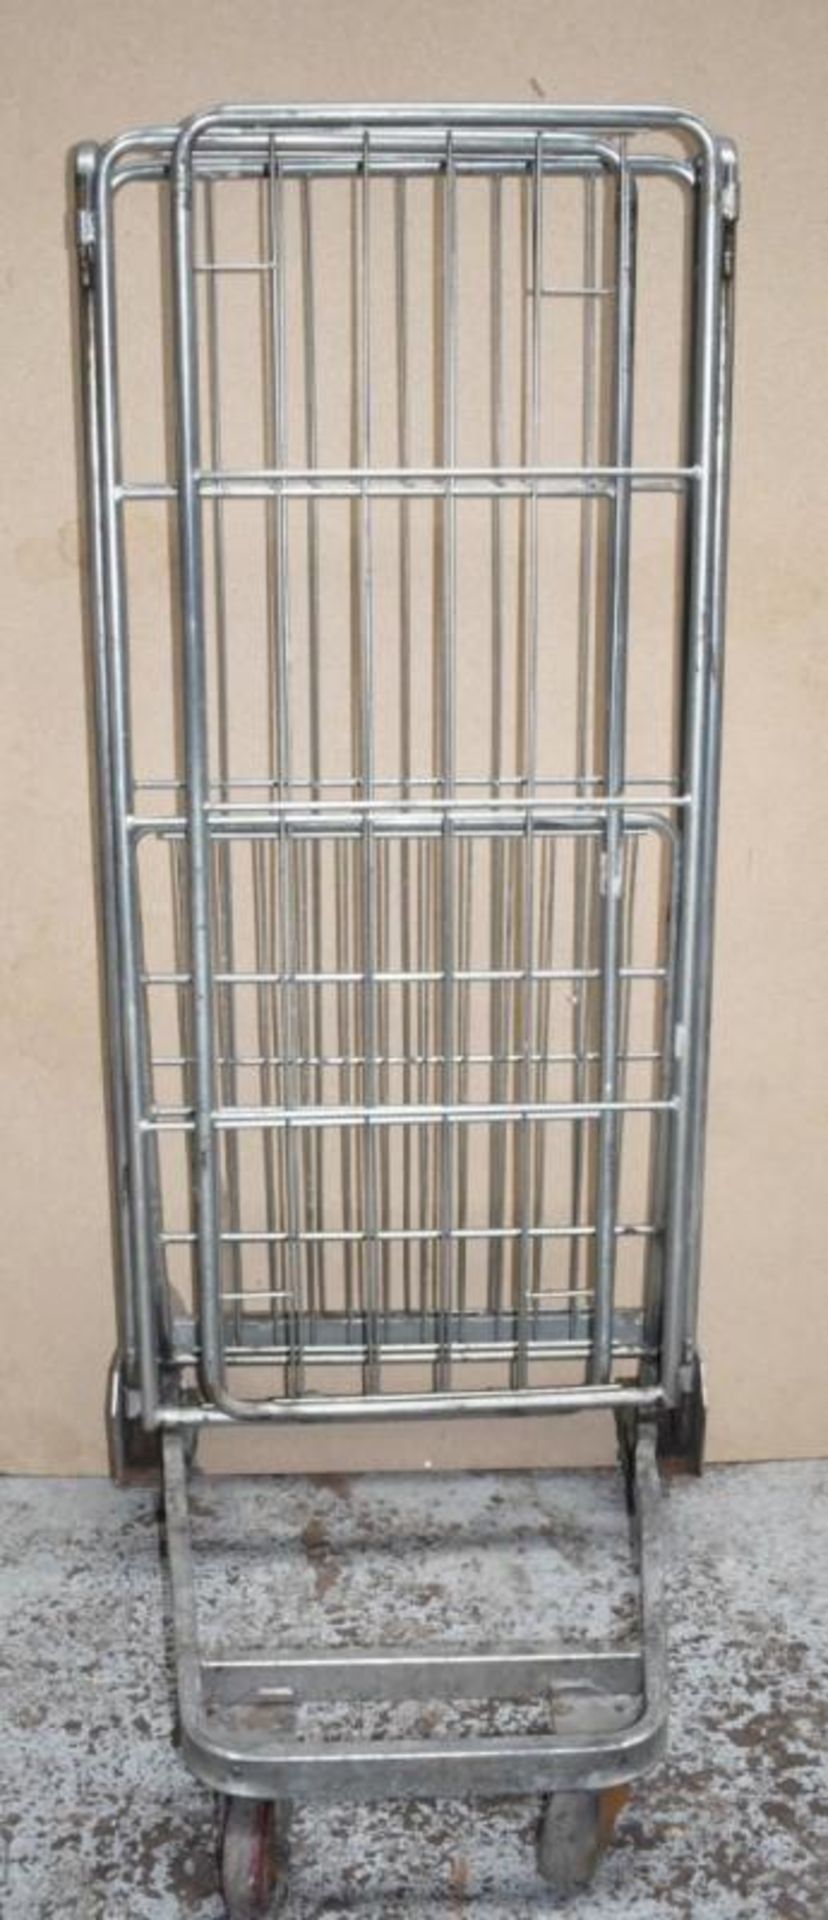 1 x Roller Cage With Heavy Duty Castors - Demountable With Three Sides - Ideal For Storing and Movin - Image 4 of 9